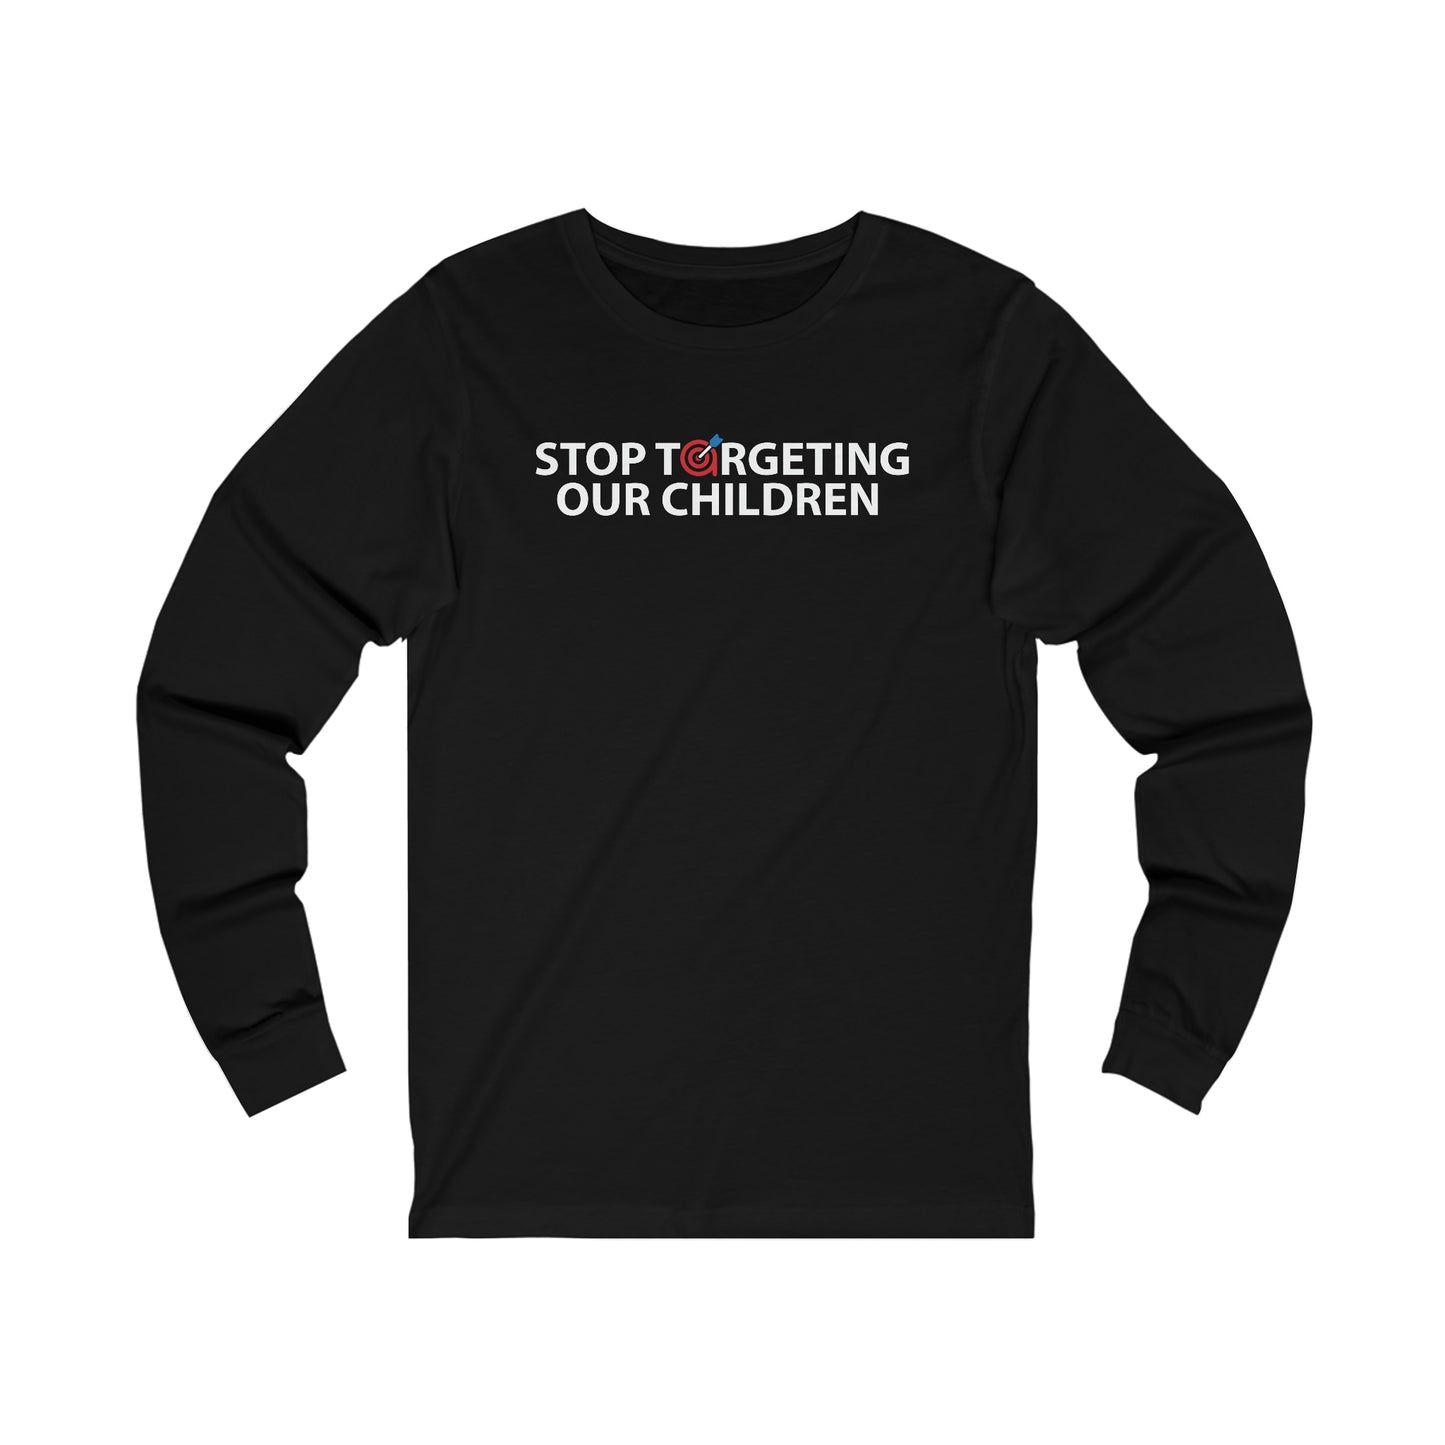 STOP TARGETING OUR CHILDREN - UNISEX LONG SLEEVE